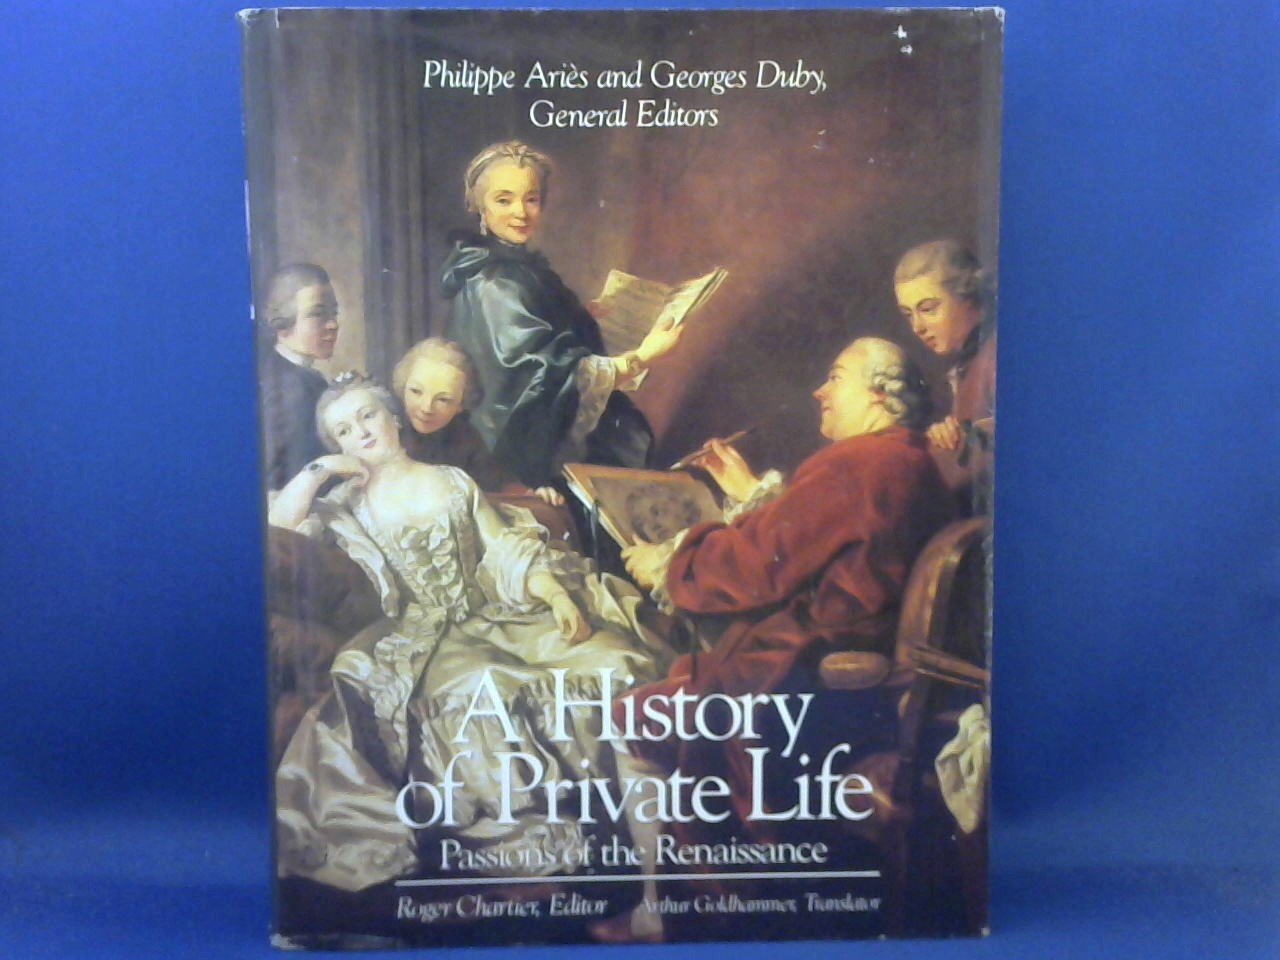 Aries, Philippe and Duby, Georges (general editors) - A history of private life. Vol.III: Passions of the Renaissance.